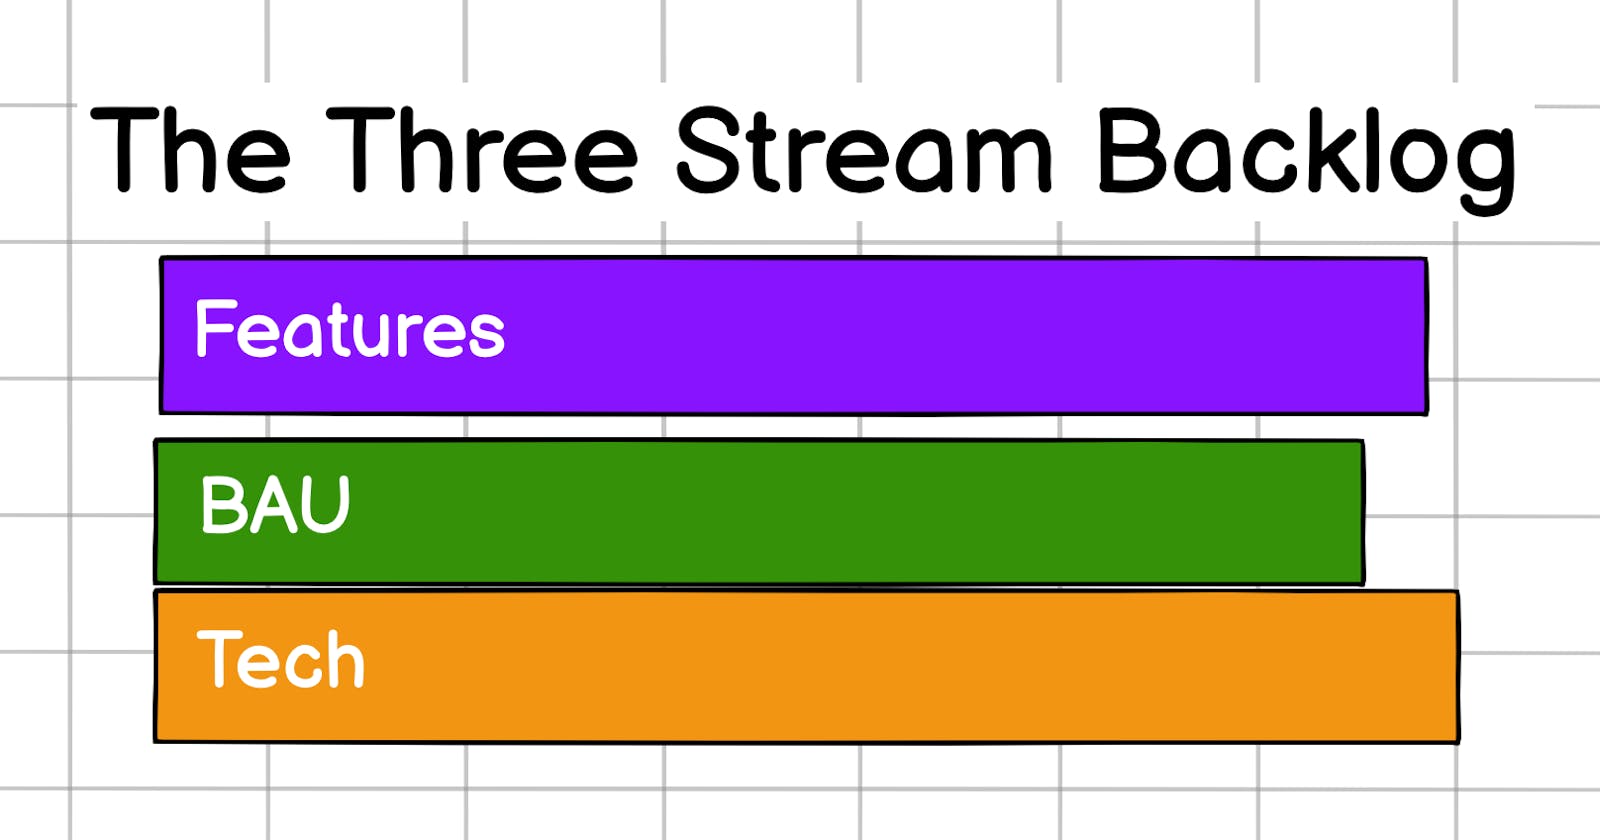 Deliver a Meaningful Tech Strategy While Still Shipping Features with The Three Stream Backlog